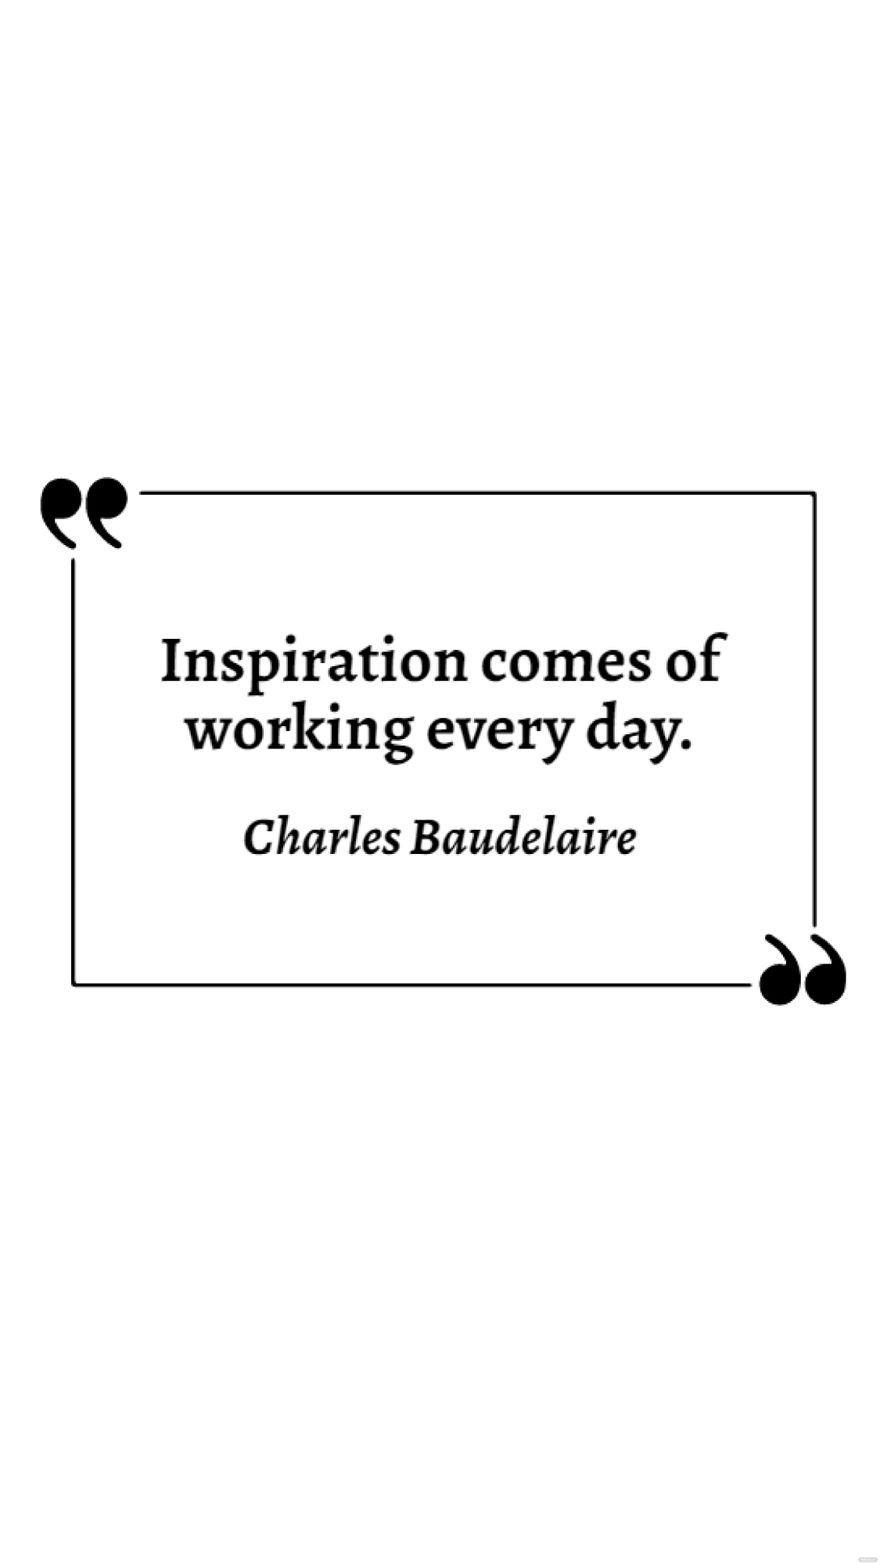 Free Charles Baudelaire - Inspiration comes of working every day.